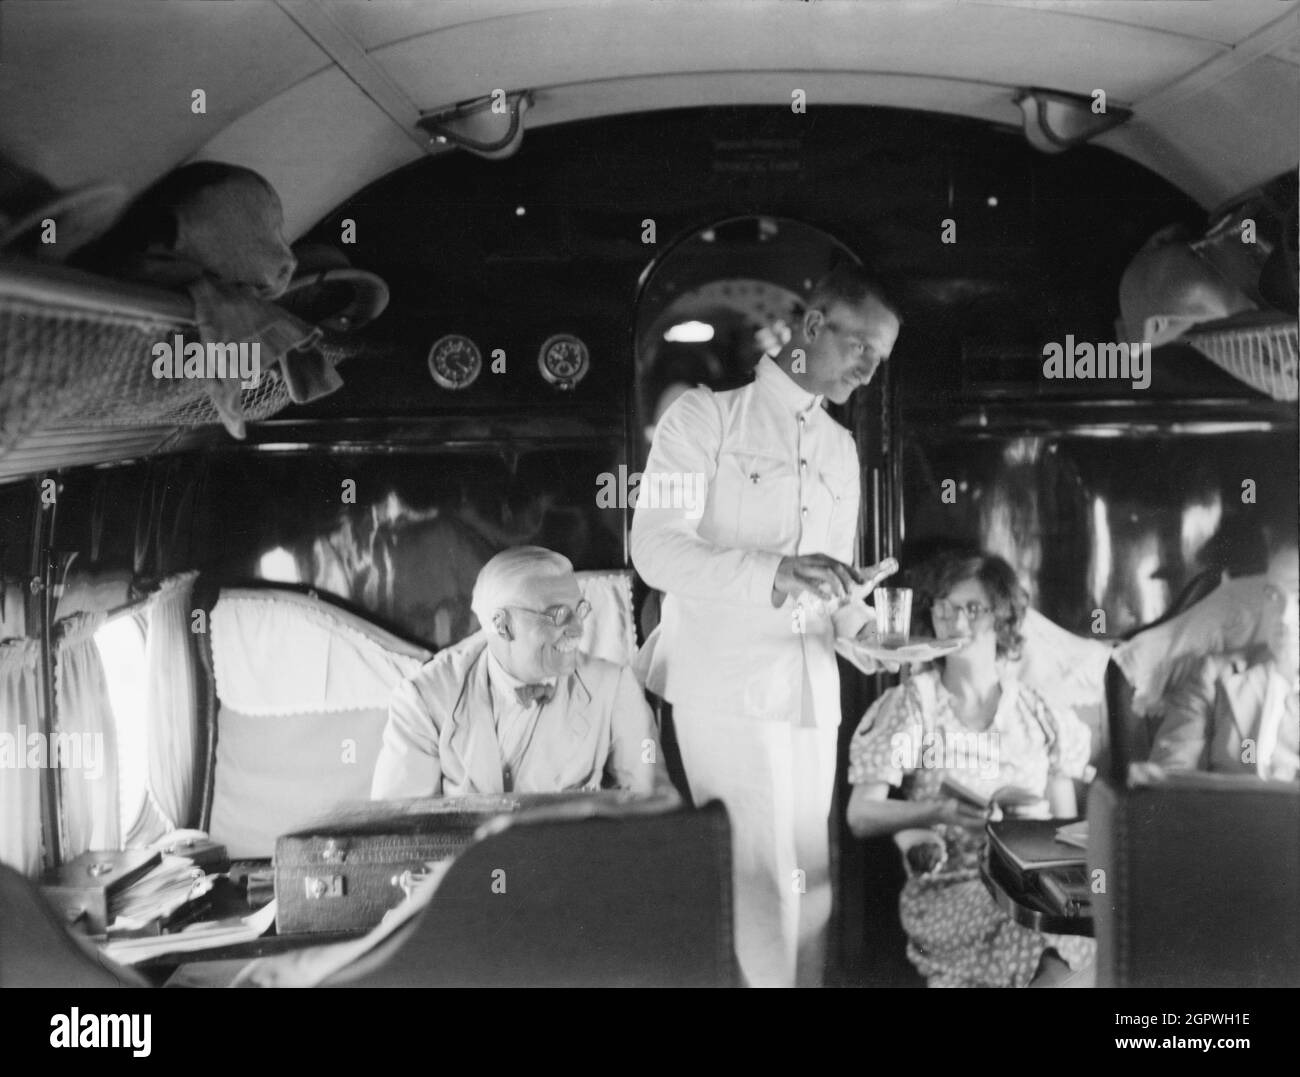 Vintage photo circa 1935 of a steward serving drinks on board an Imperial Airways Handley Page HP 42 airliner over Africa.    The HP 42 were four-engine commercial long-range biplane airliners designed and manufactured by British aviation company Handley Page Stock Photo